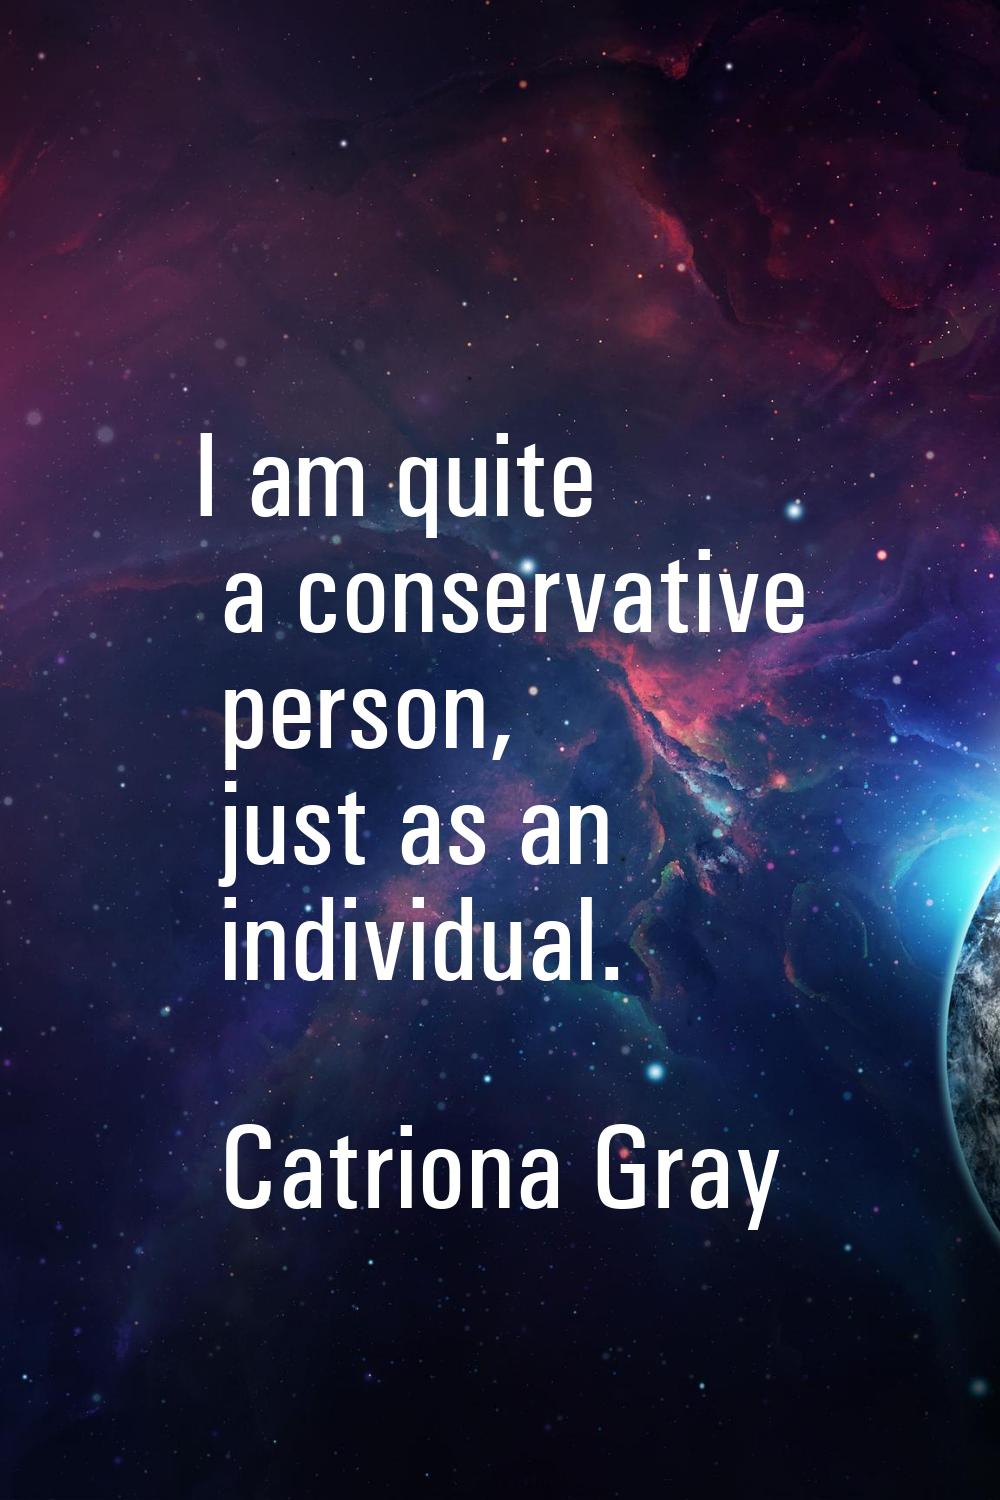 I am quite a conservative person, just as an individual.